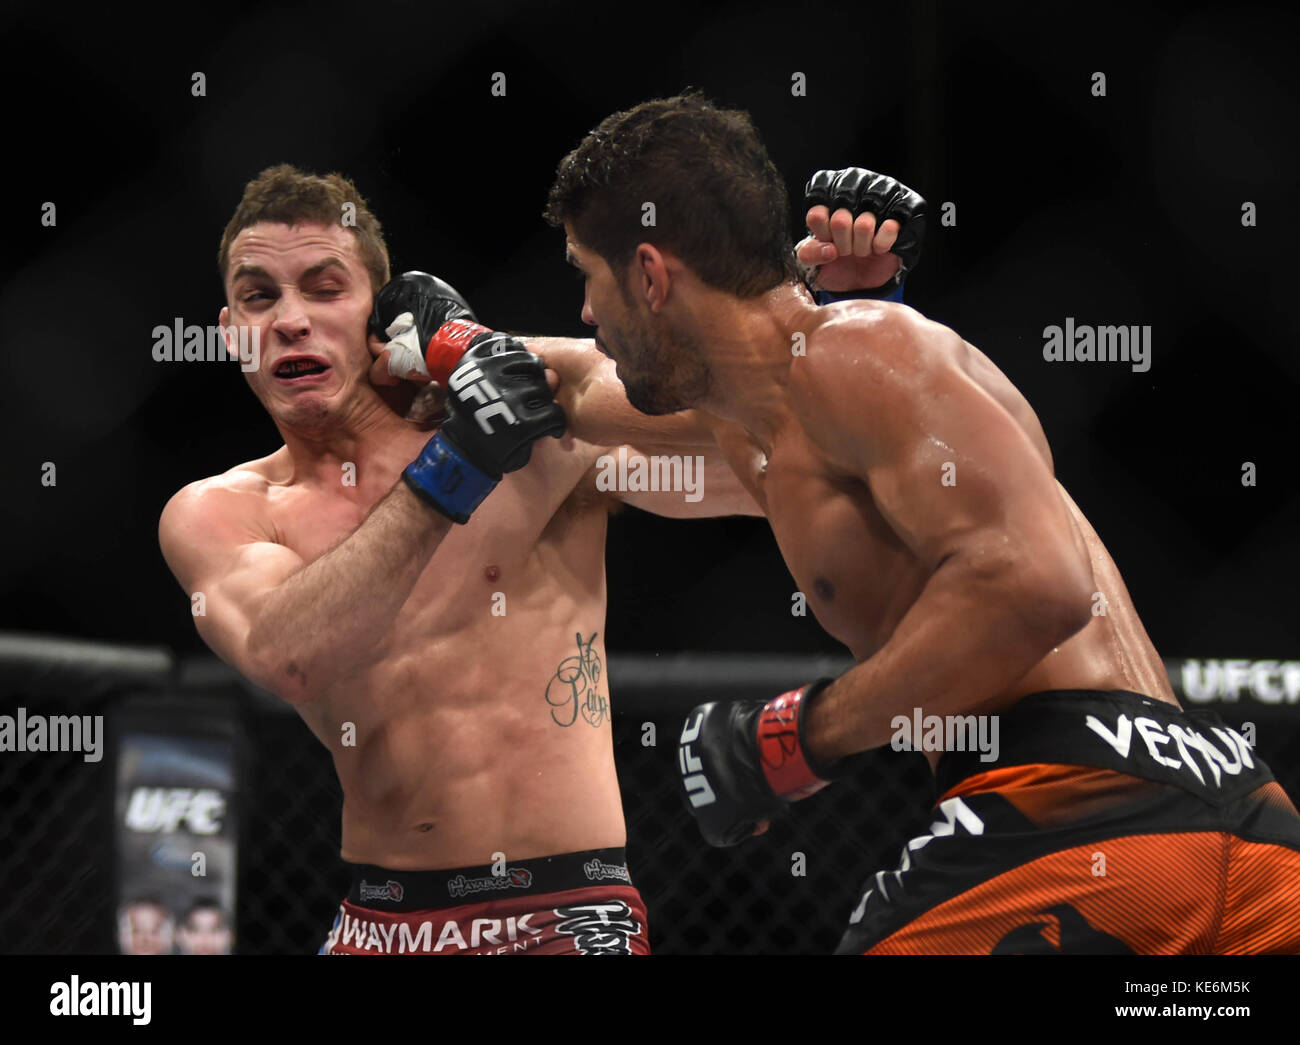 20+ Ufc Championship Stock Photos, Pictures & Royalty-Free Images - iStock